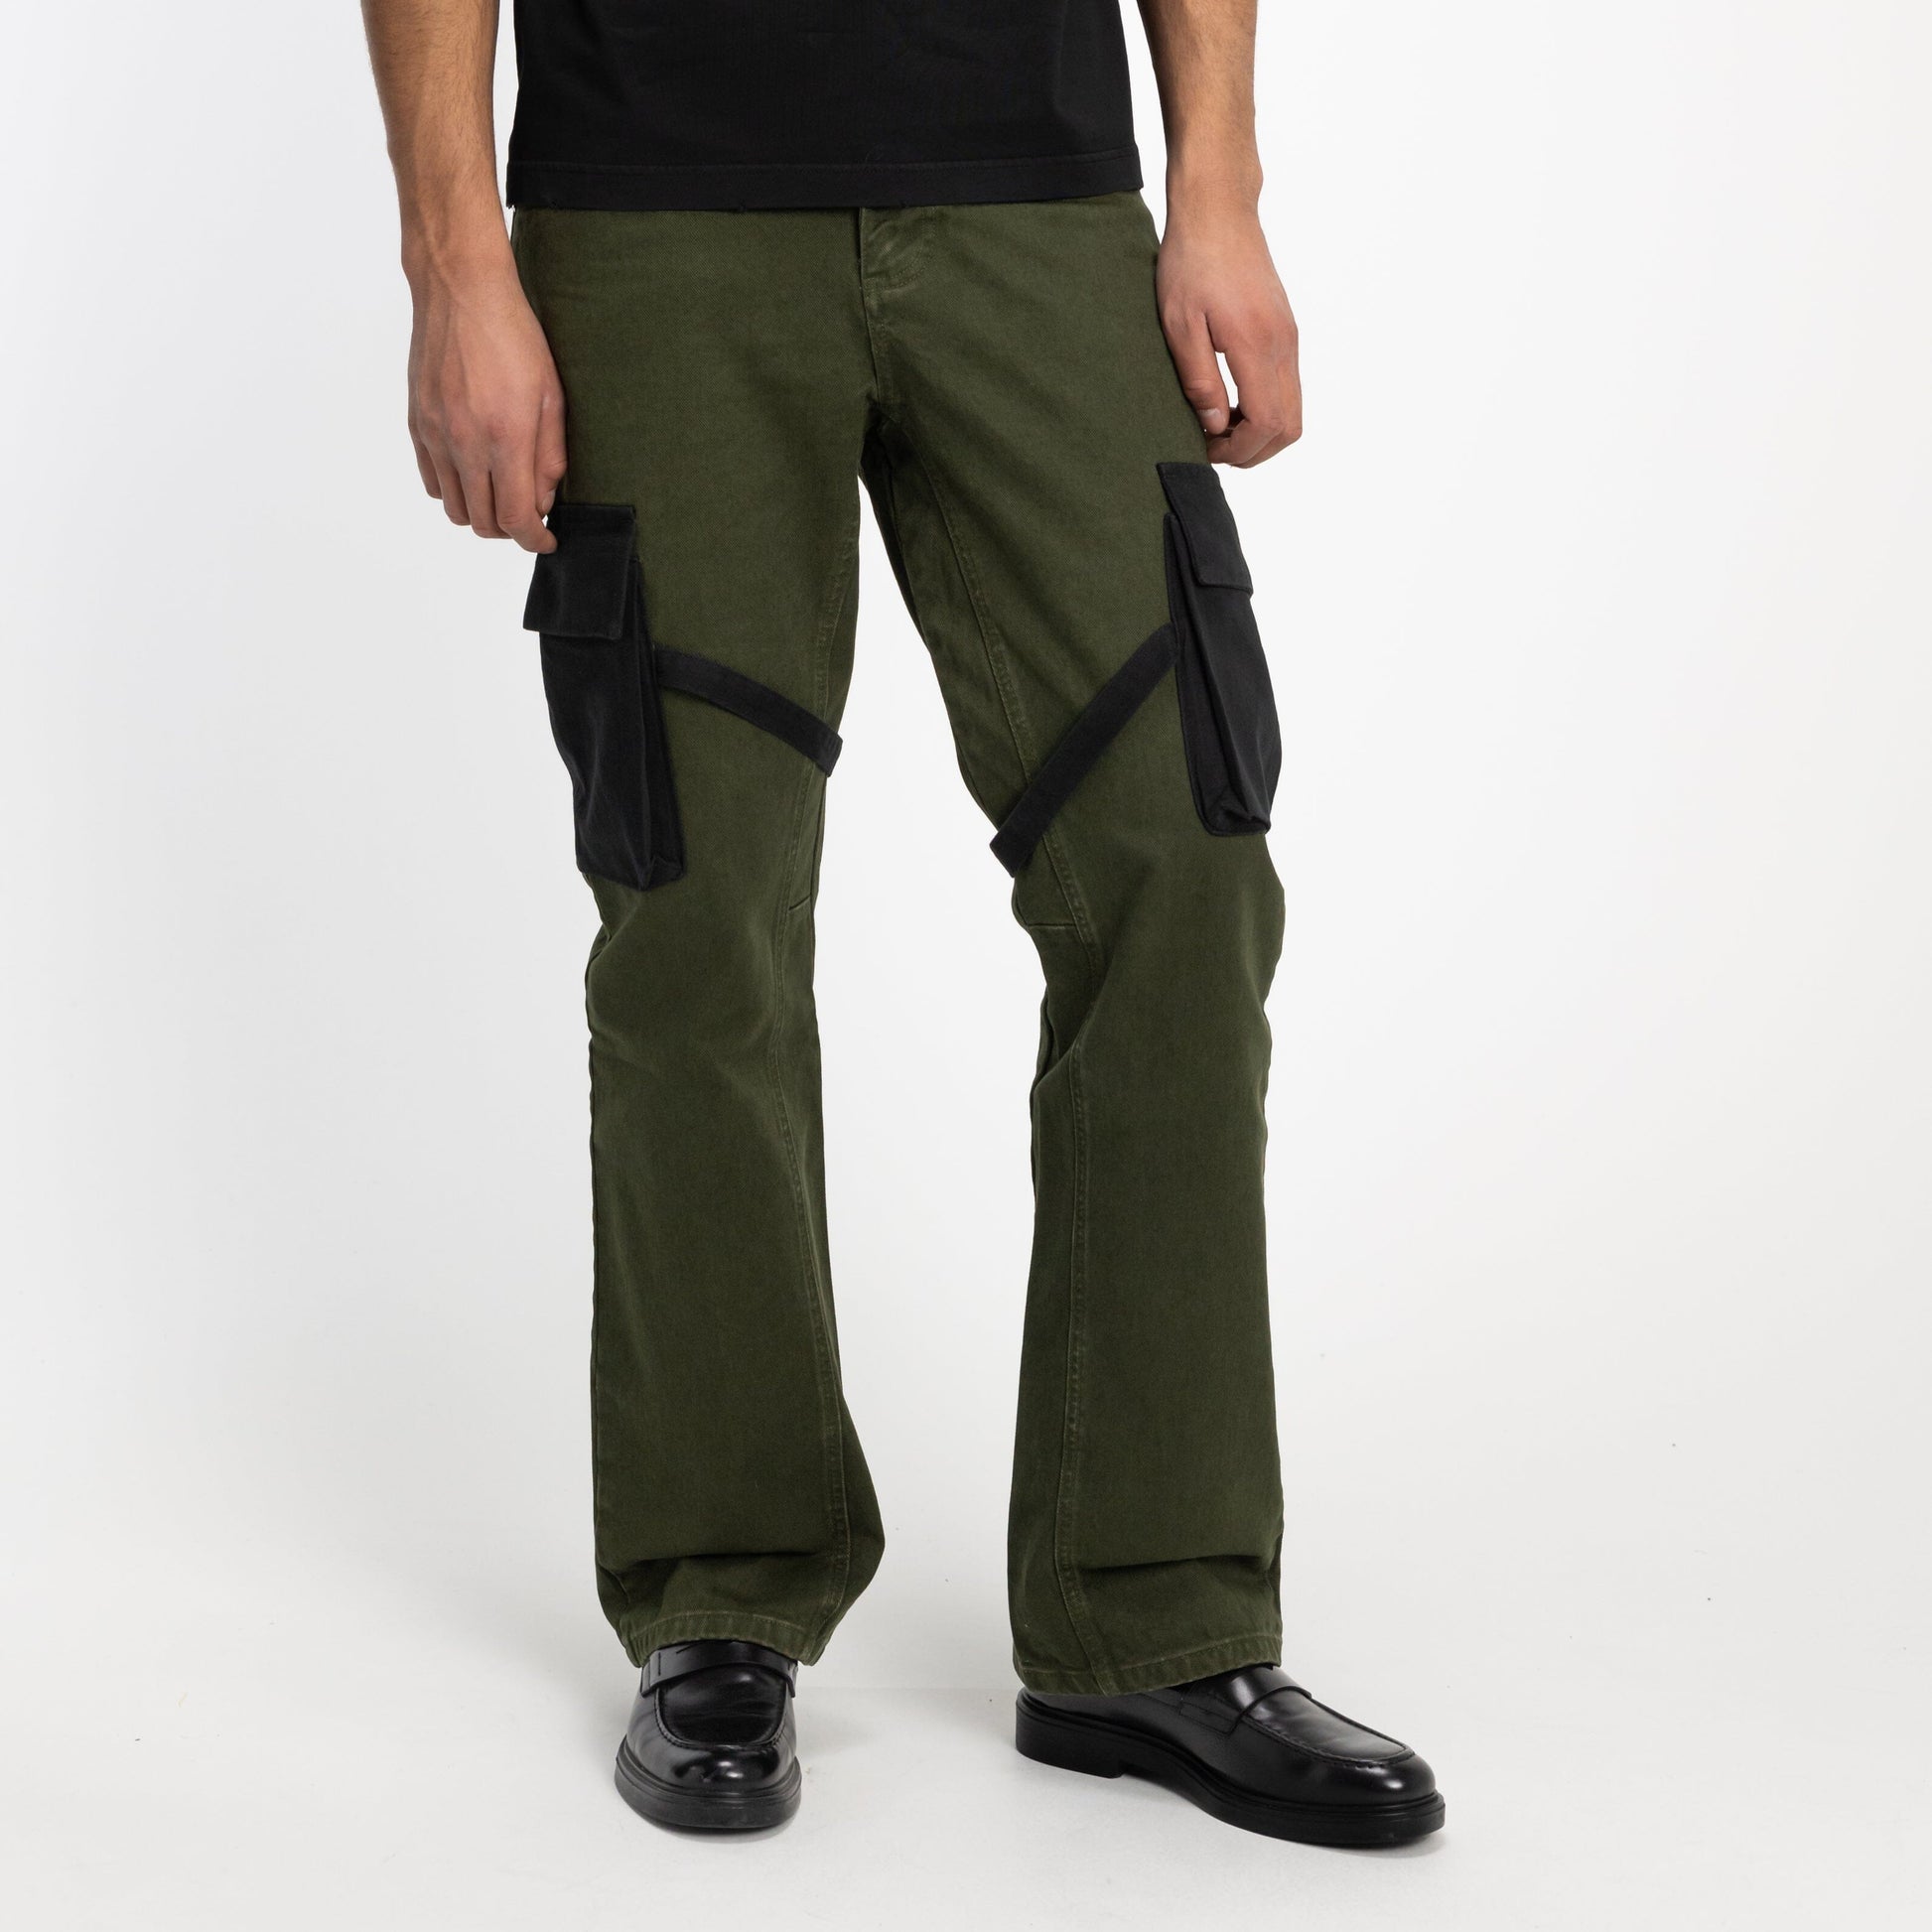 Strap Contrast Cargo Pants in Army Green with Black Pockets